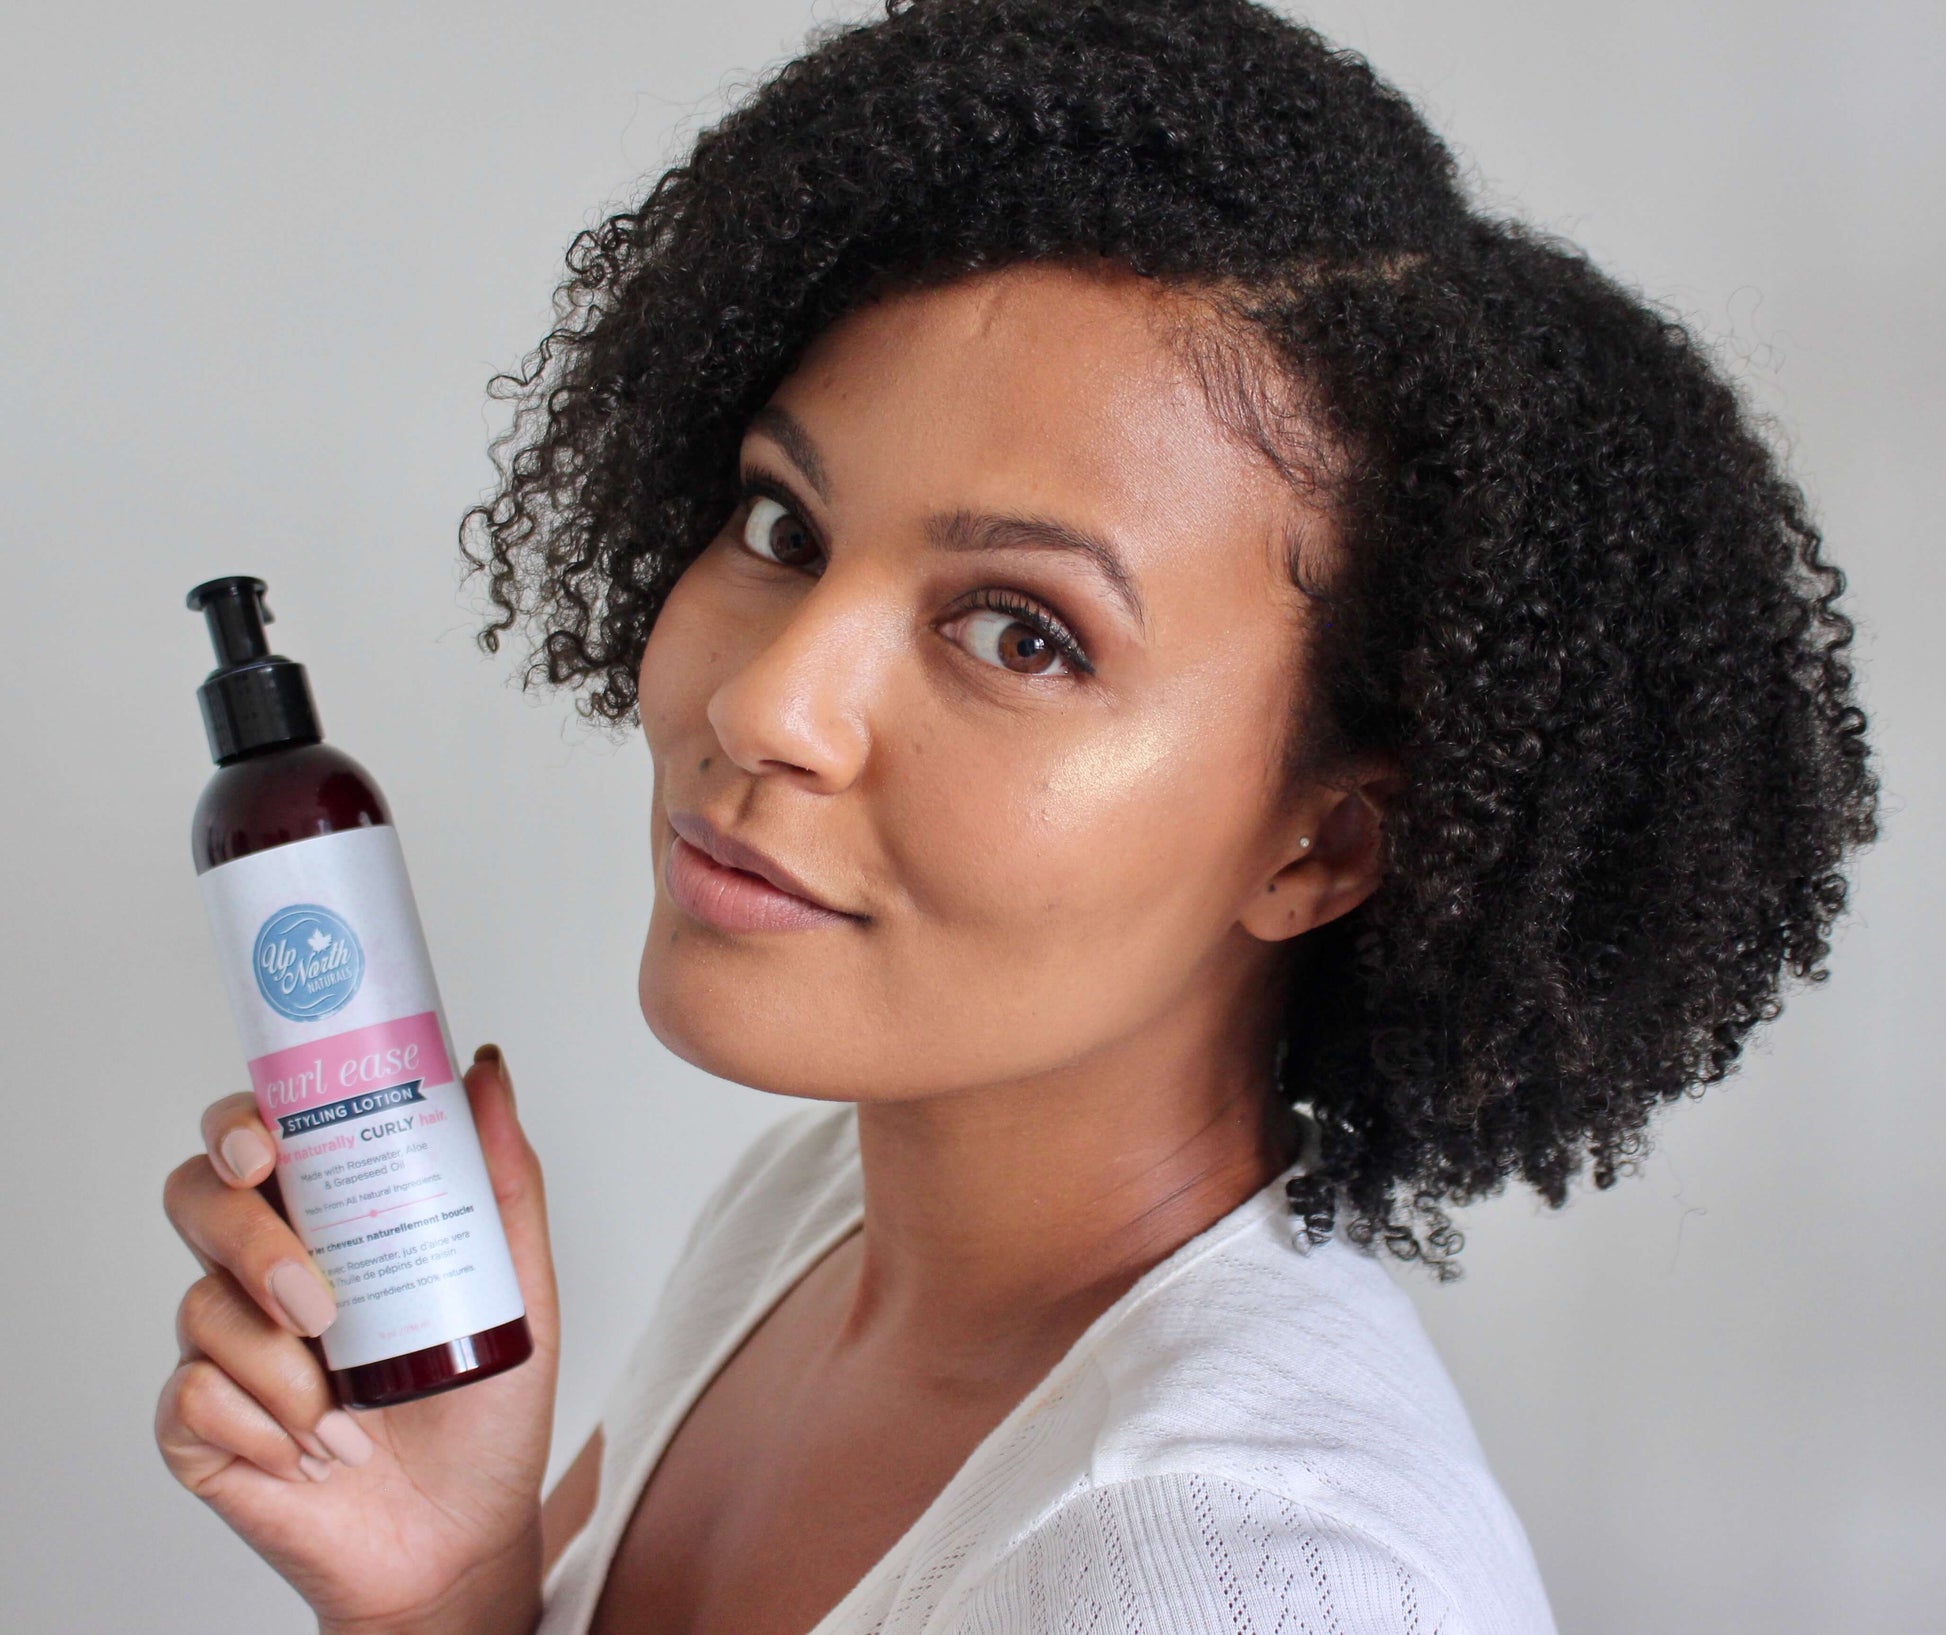 Woman with beautiful naturally curl hair holding curl ease styling lotion